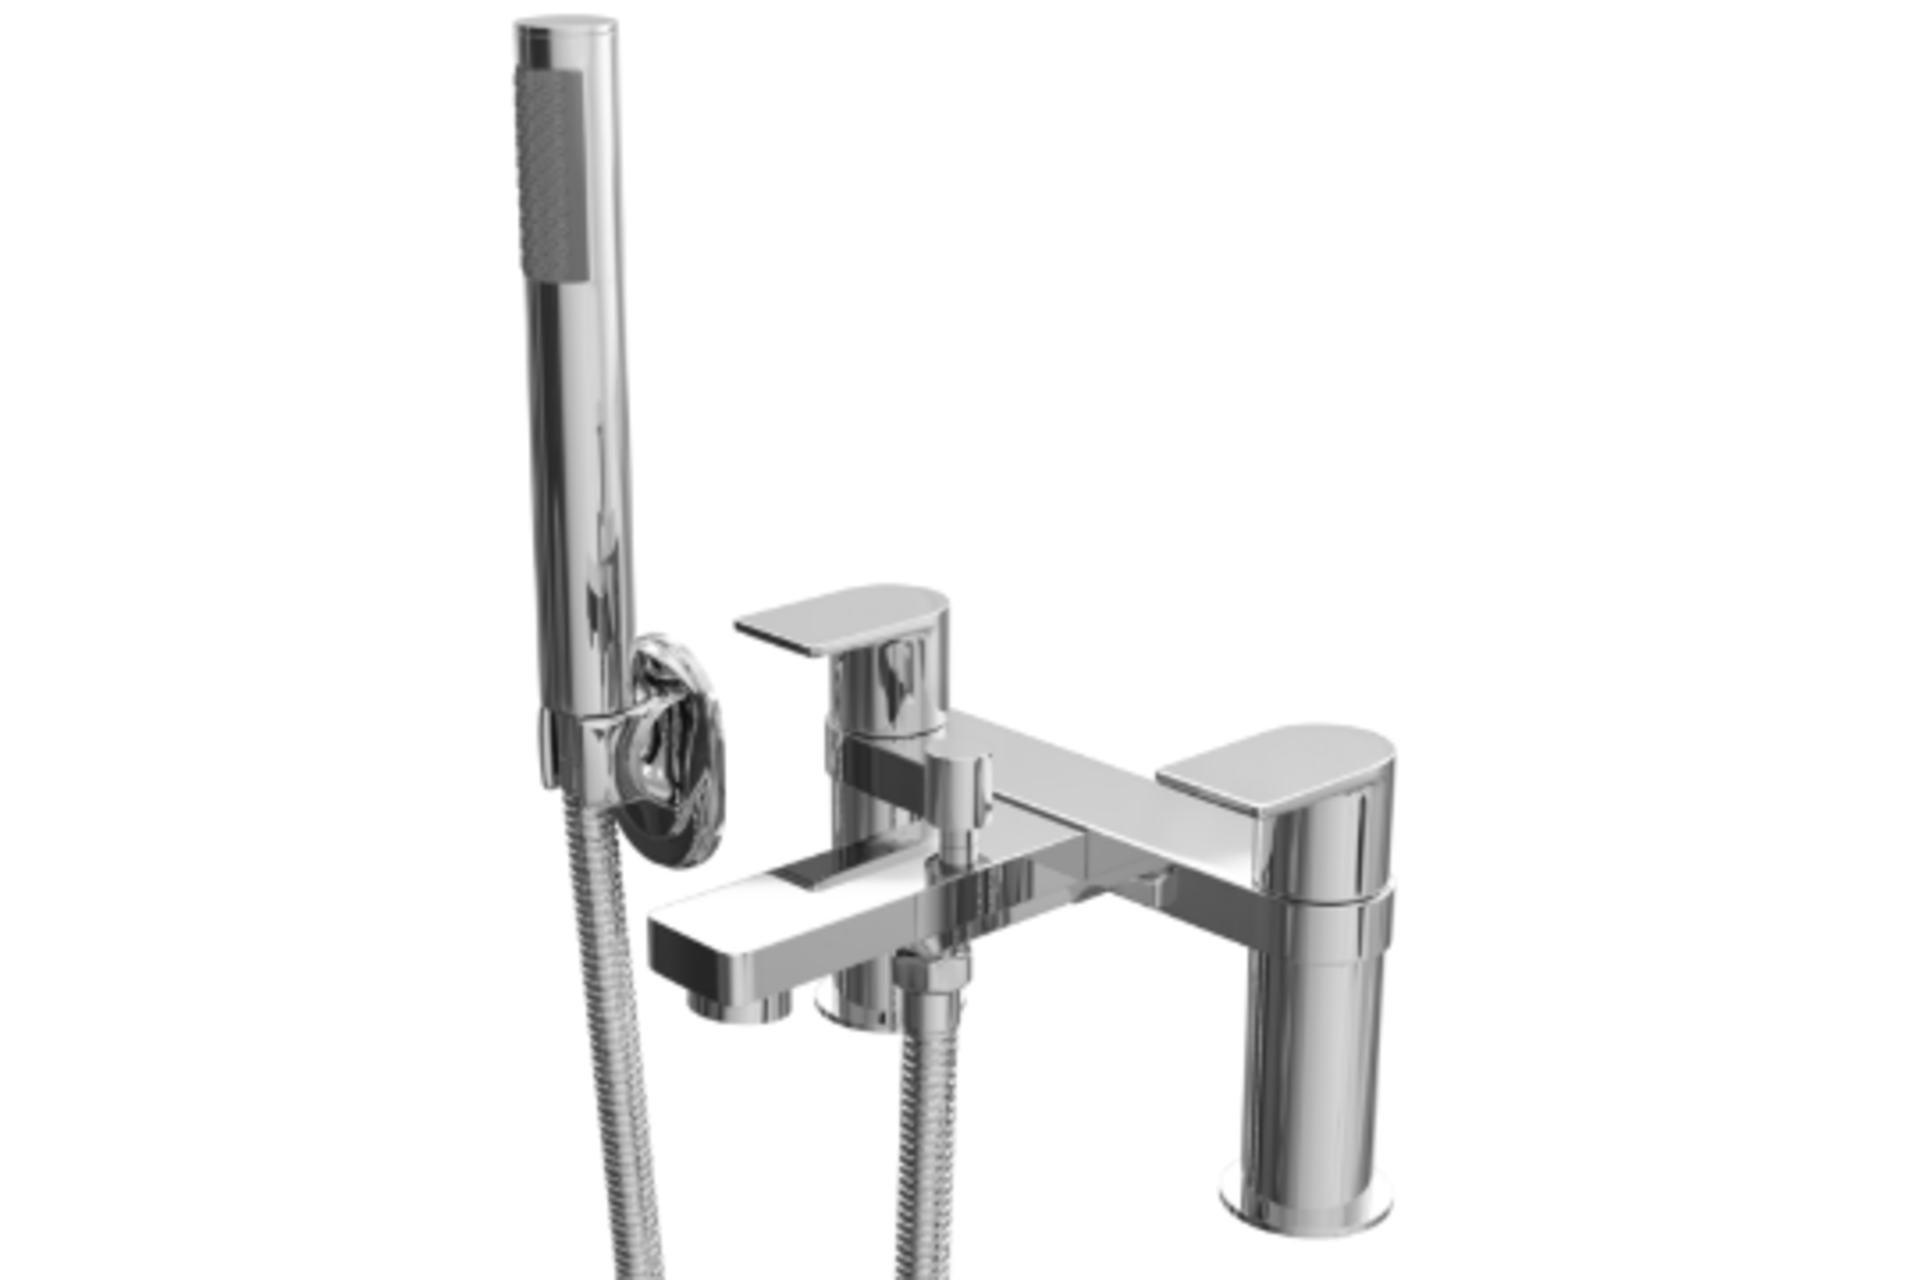 BRAND NEW WIND BATH SHOWER MIXER WITH HOSE AND HANDSET RRP £179